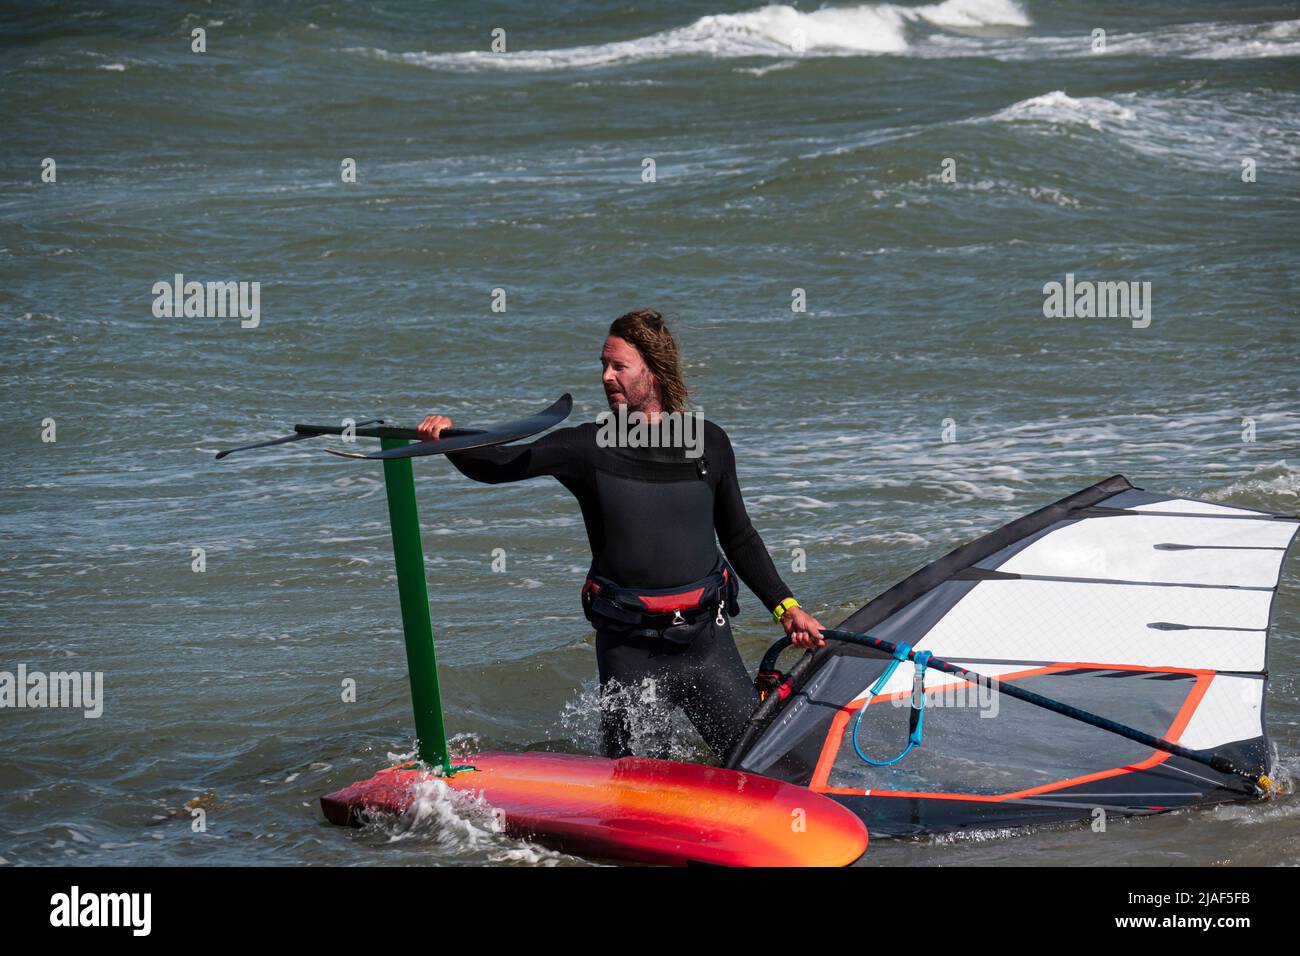 Wind foil surfer goes into the sea with his hydrofoil board Stock Photo